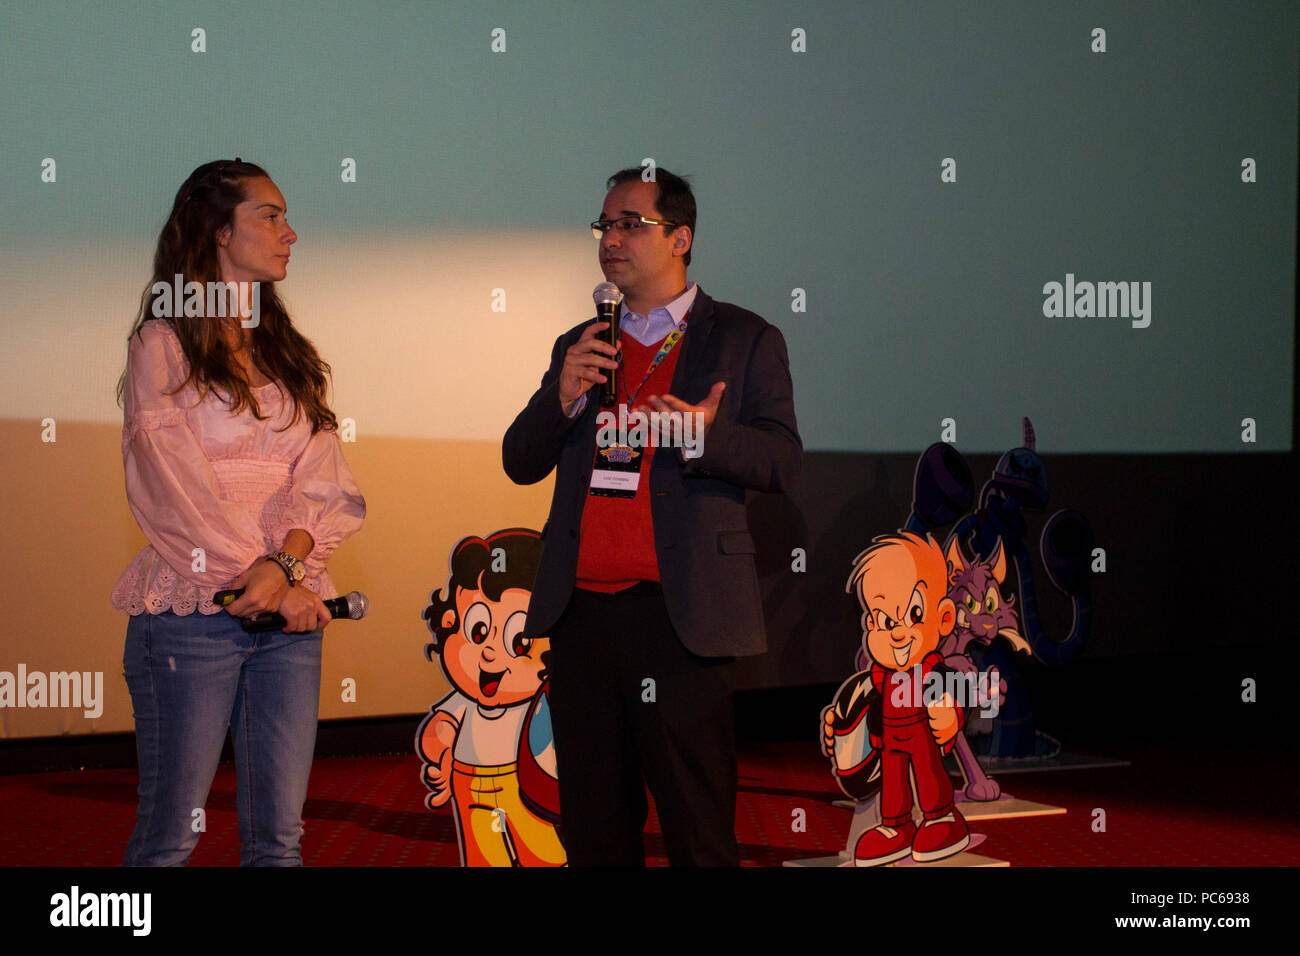 SÃO PAULO, SP - 31.07.2018: ANIMAÇÃO DO SENNINHA É LANÇADA EM SP - This event was held on Tuesday (31) the launch event of the new animated series of the character Senninha that will premiere on 08/08 on Gloobat&#39;s Glat cat channel. The animation that is inspired by three-time Formula 1 champion on Senna is called &quotquot;Senninha na Pista Maluca&quot; (&amotquot;Senninha na Pista Maluca&quot;), which has 26 epis, ewithwith 11 minutes, which will be shown dai daily at various times.highlight is Bianca Senna, ba, branding director of the Institute and Luiz Coimbra, relations manager of Ita Stock Photo